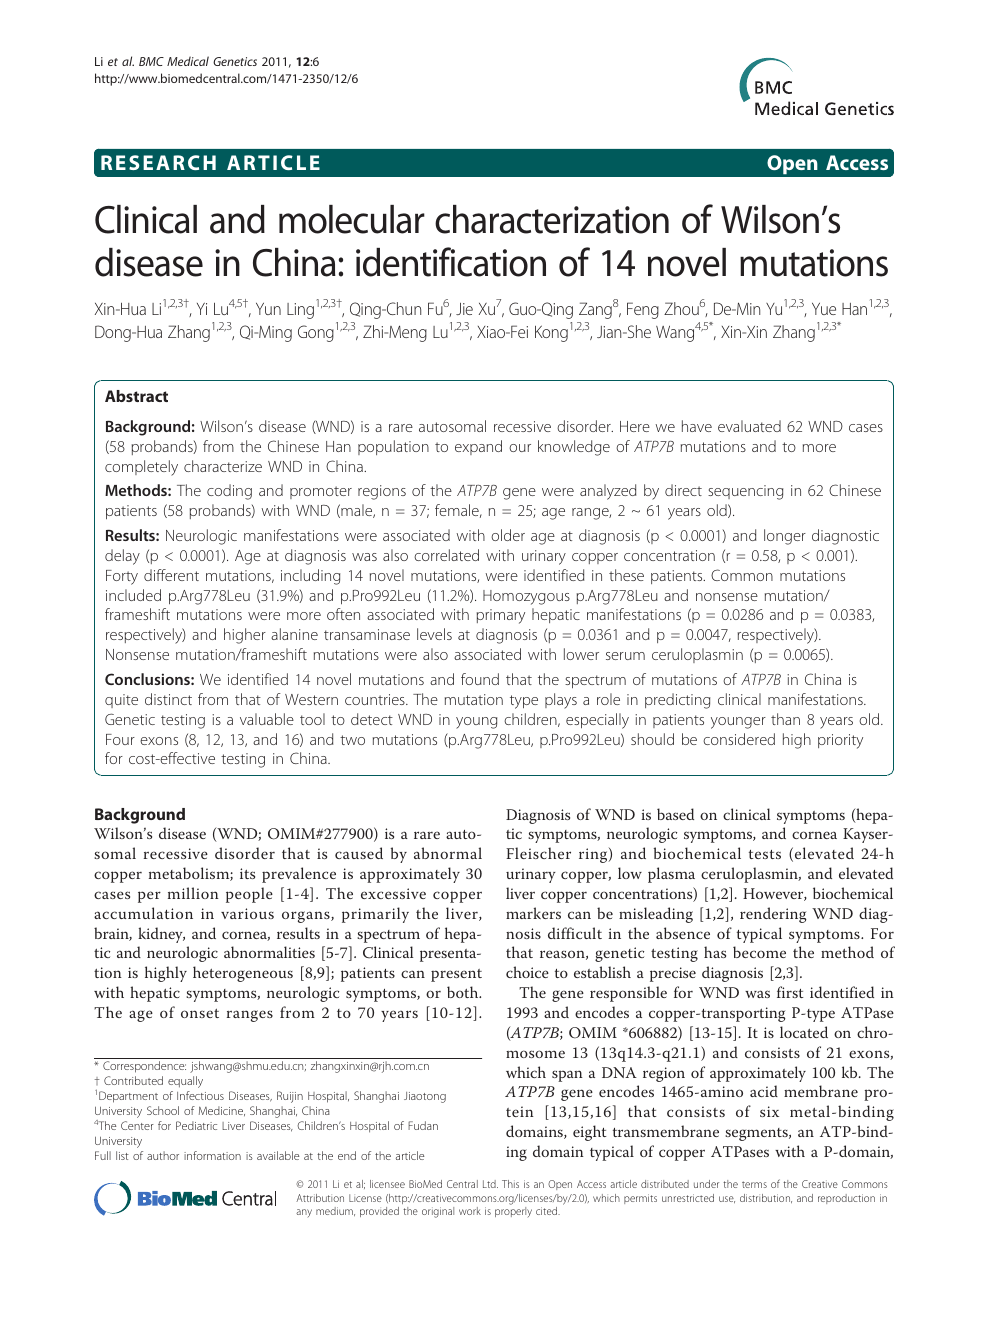 Clinical And Molecular Characterization Of Wilsons Disease - 